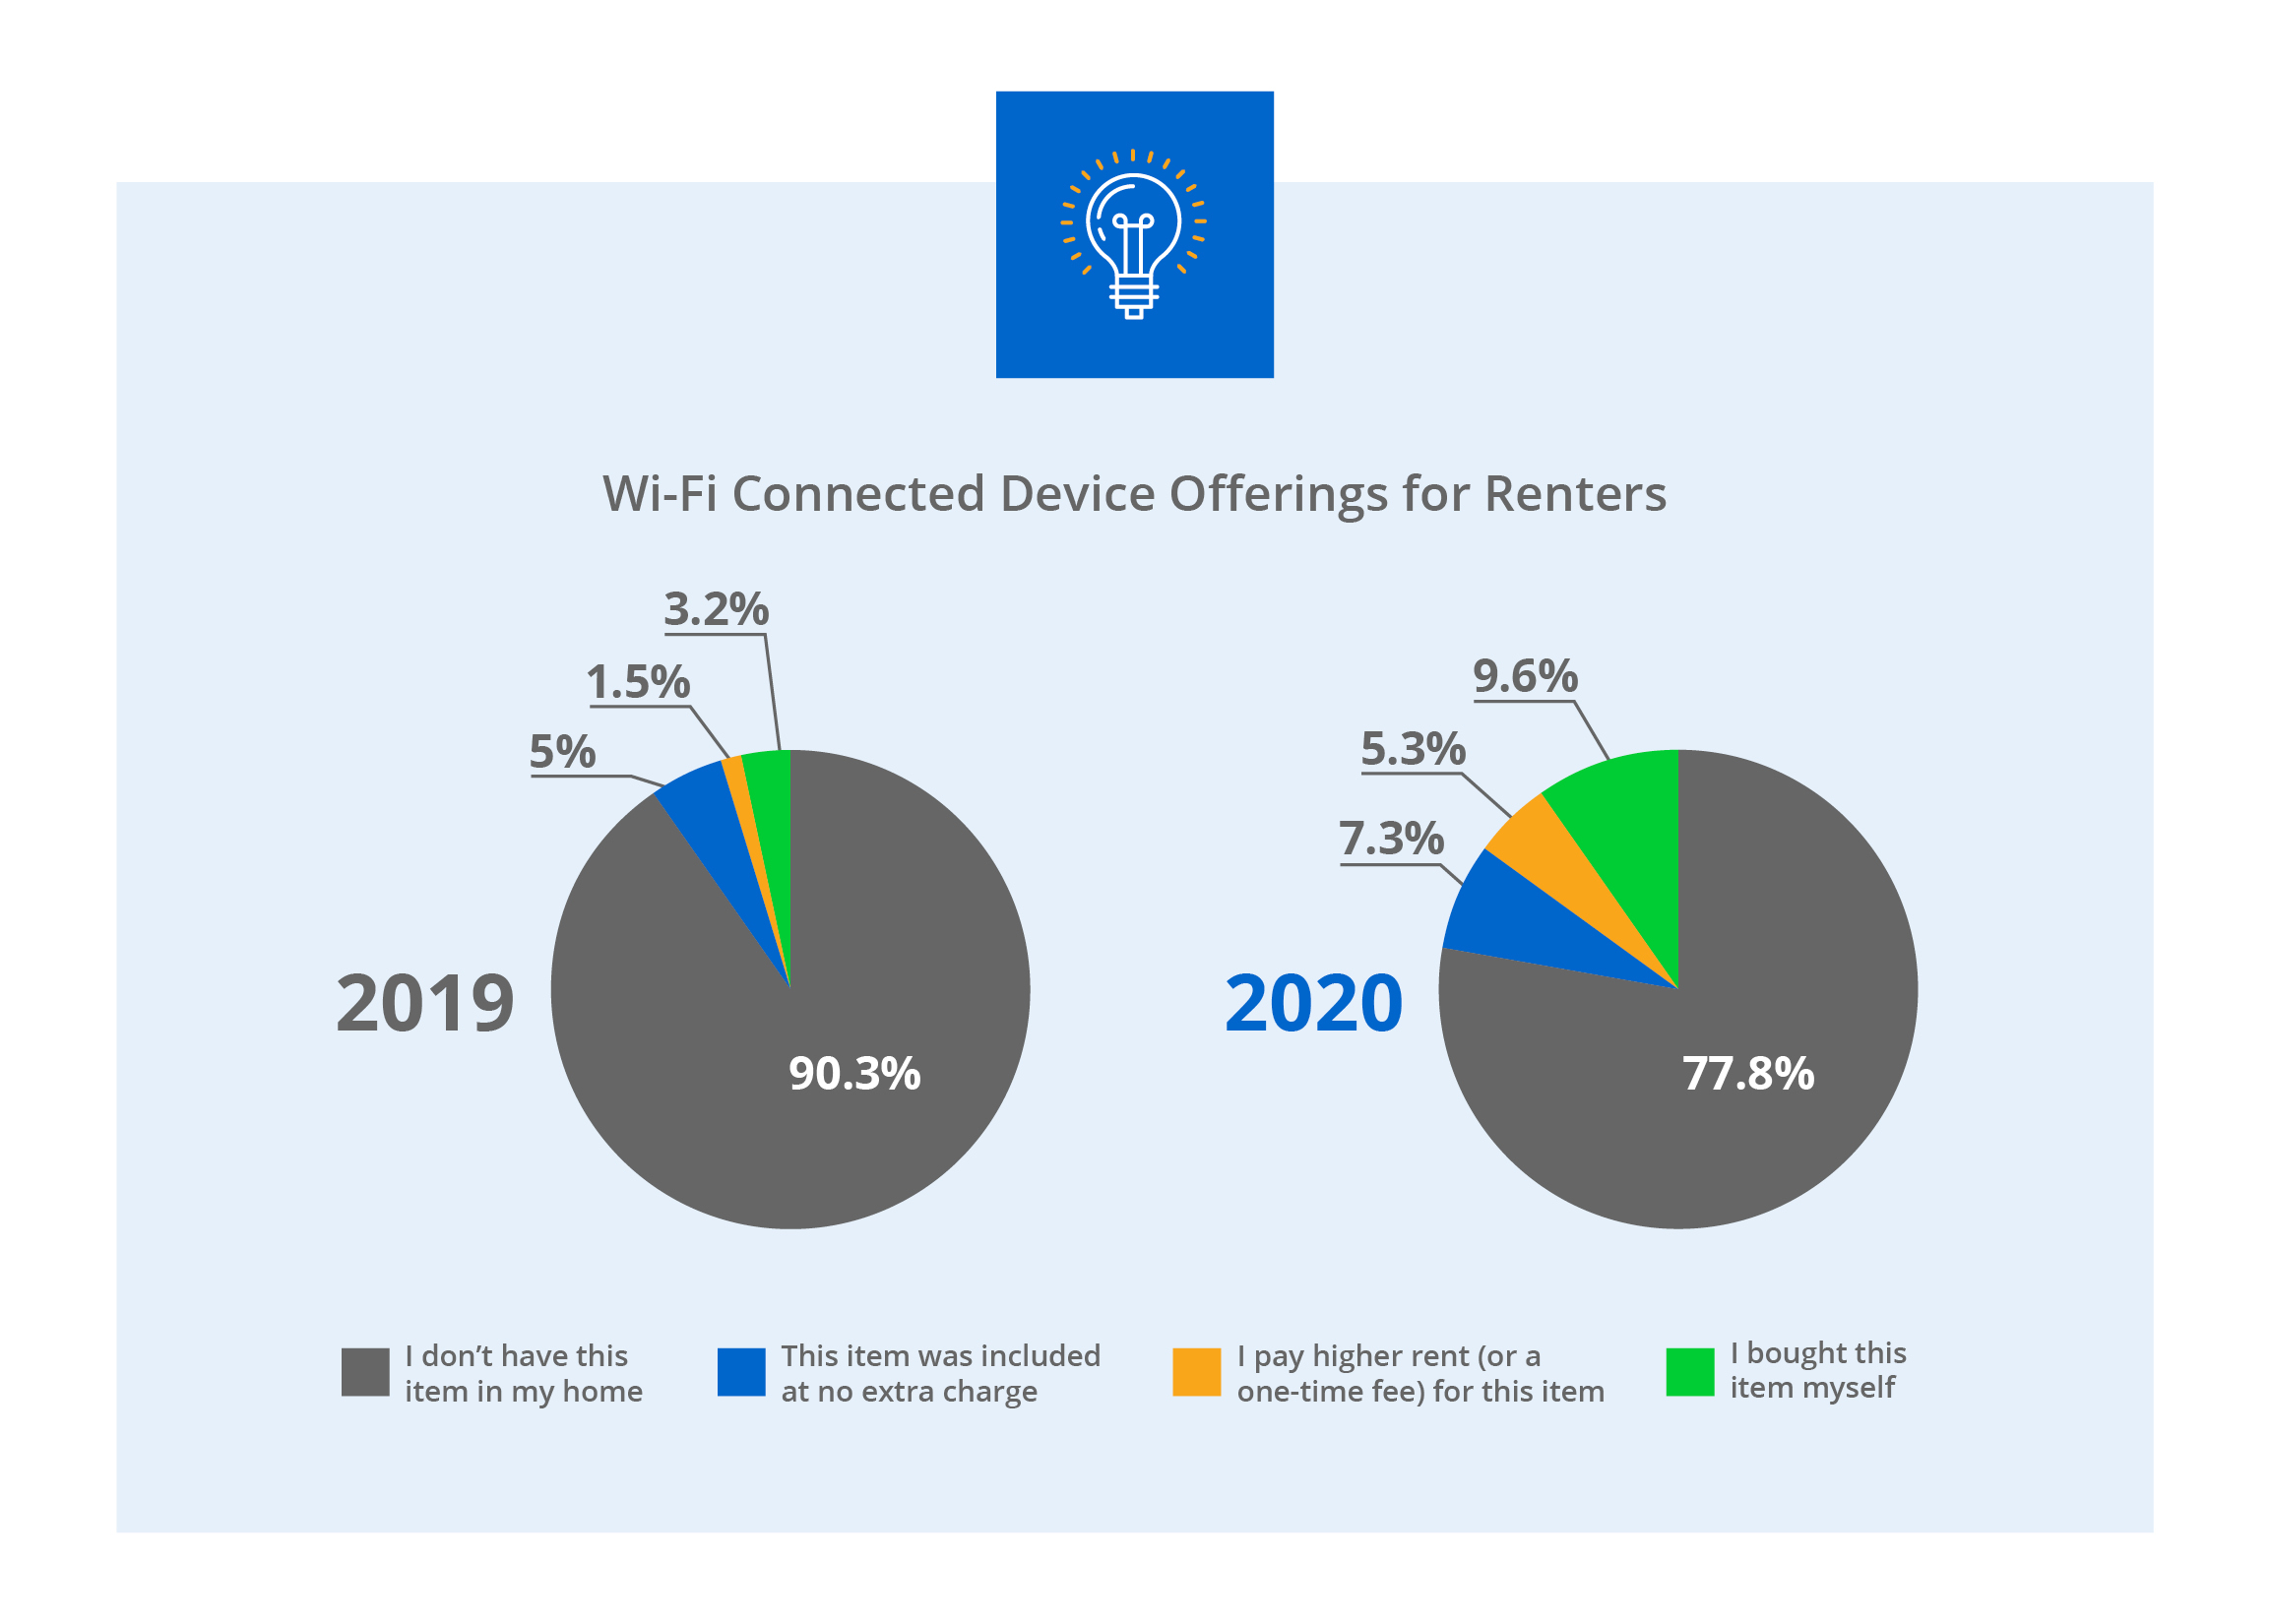 Graph showing Wi-Fi connected device offerings for renters between 2019 and 2020